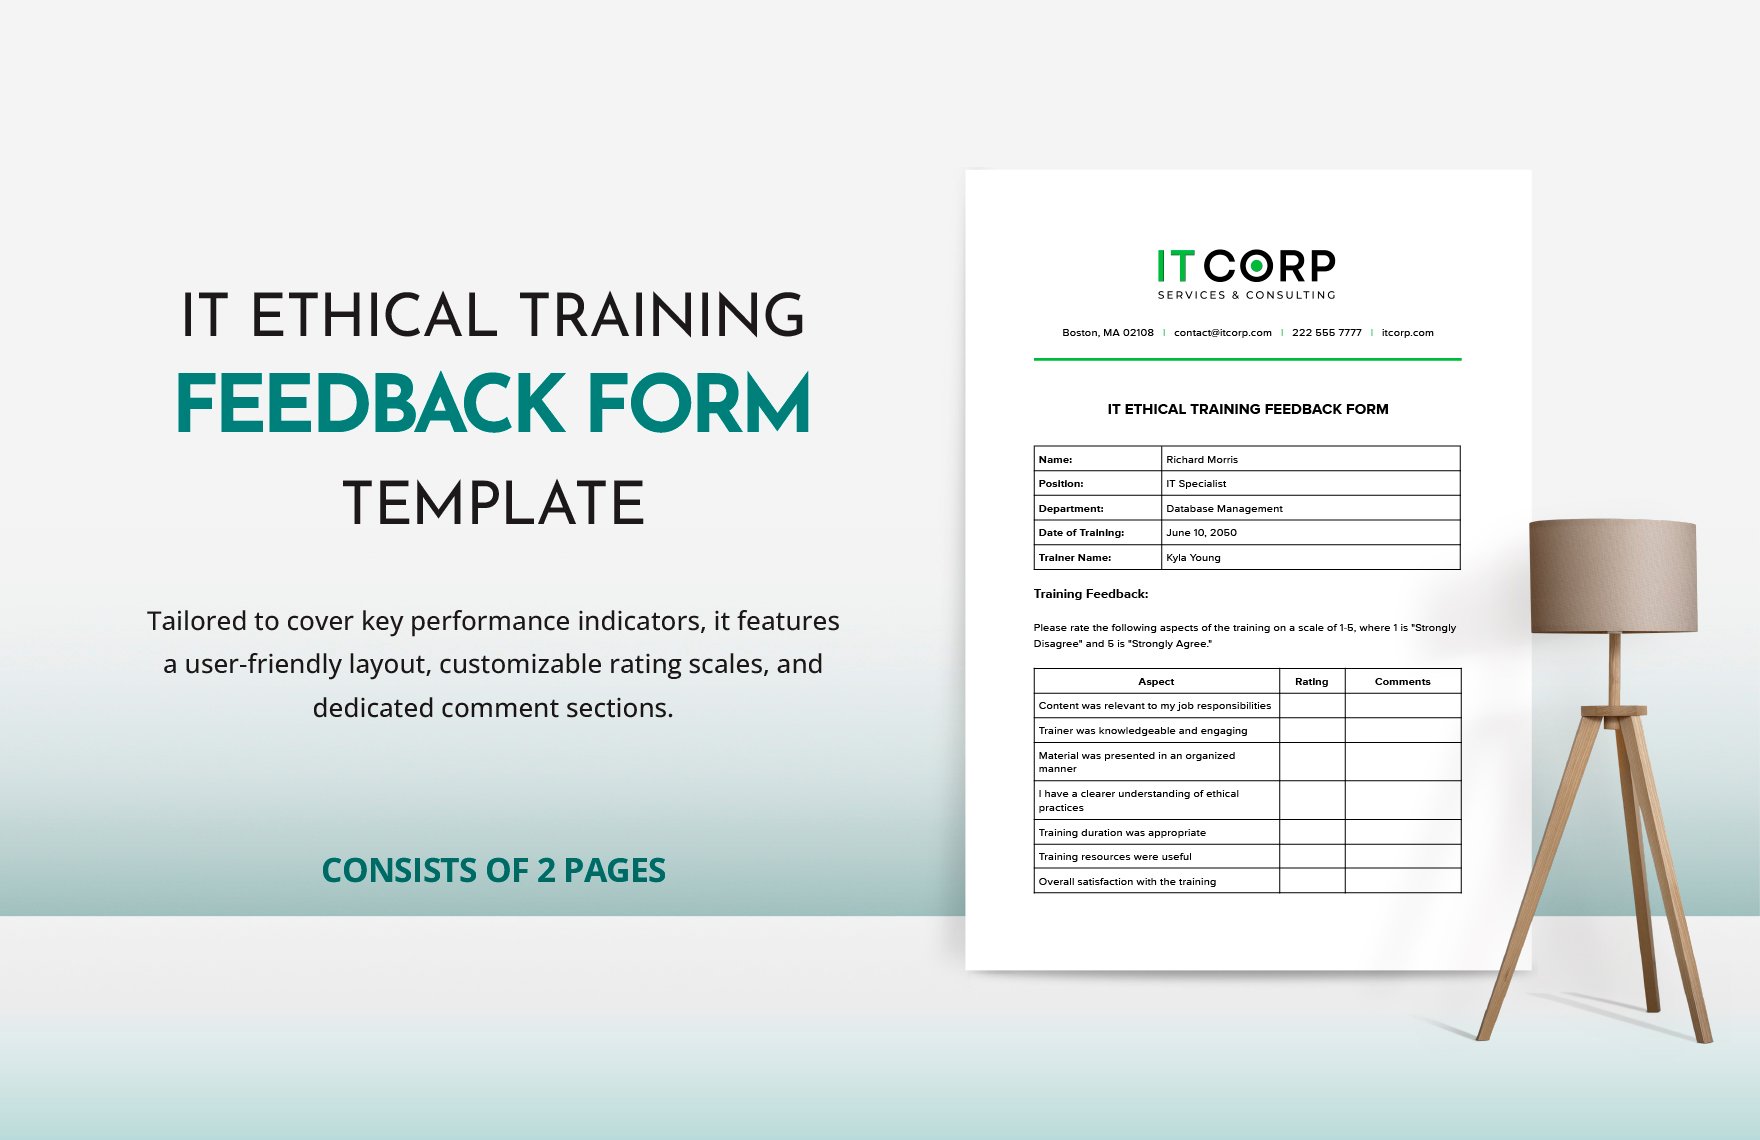 IT Ethical Training Feedback Form Template in Word, Google Docs, PDF